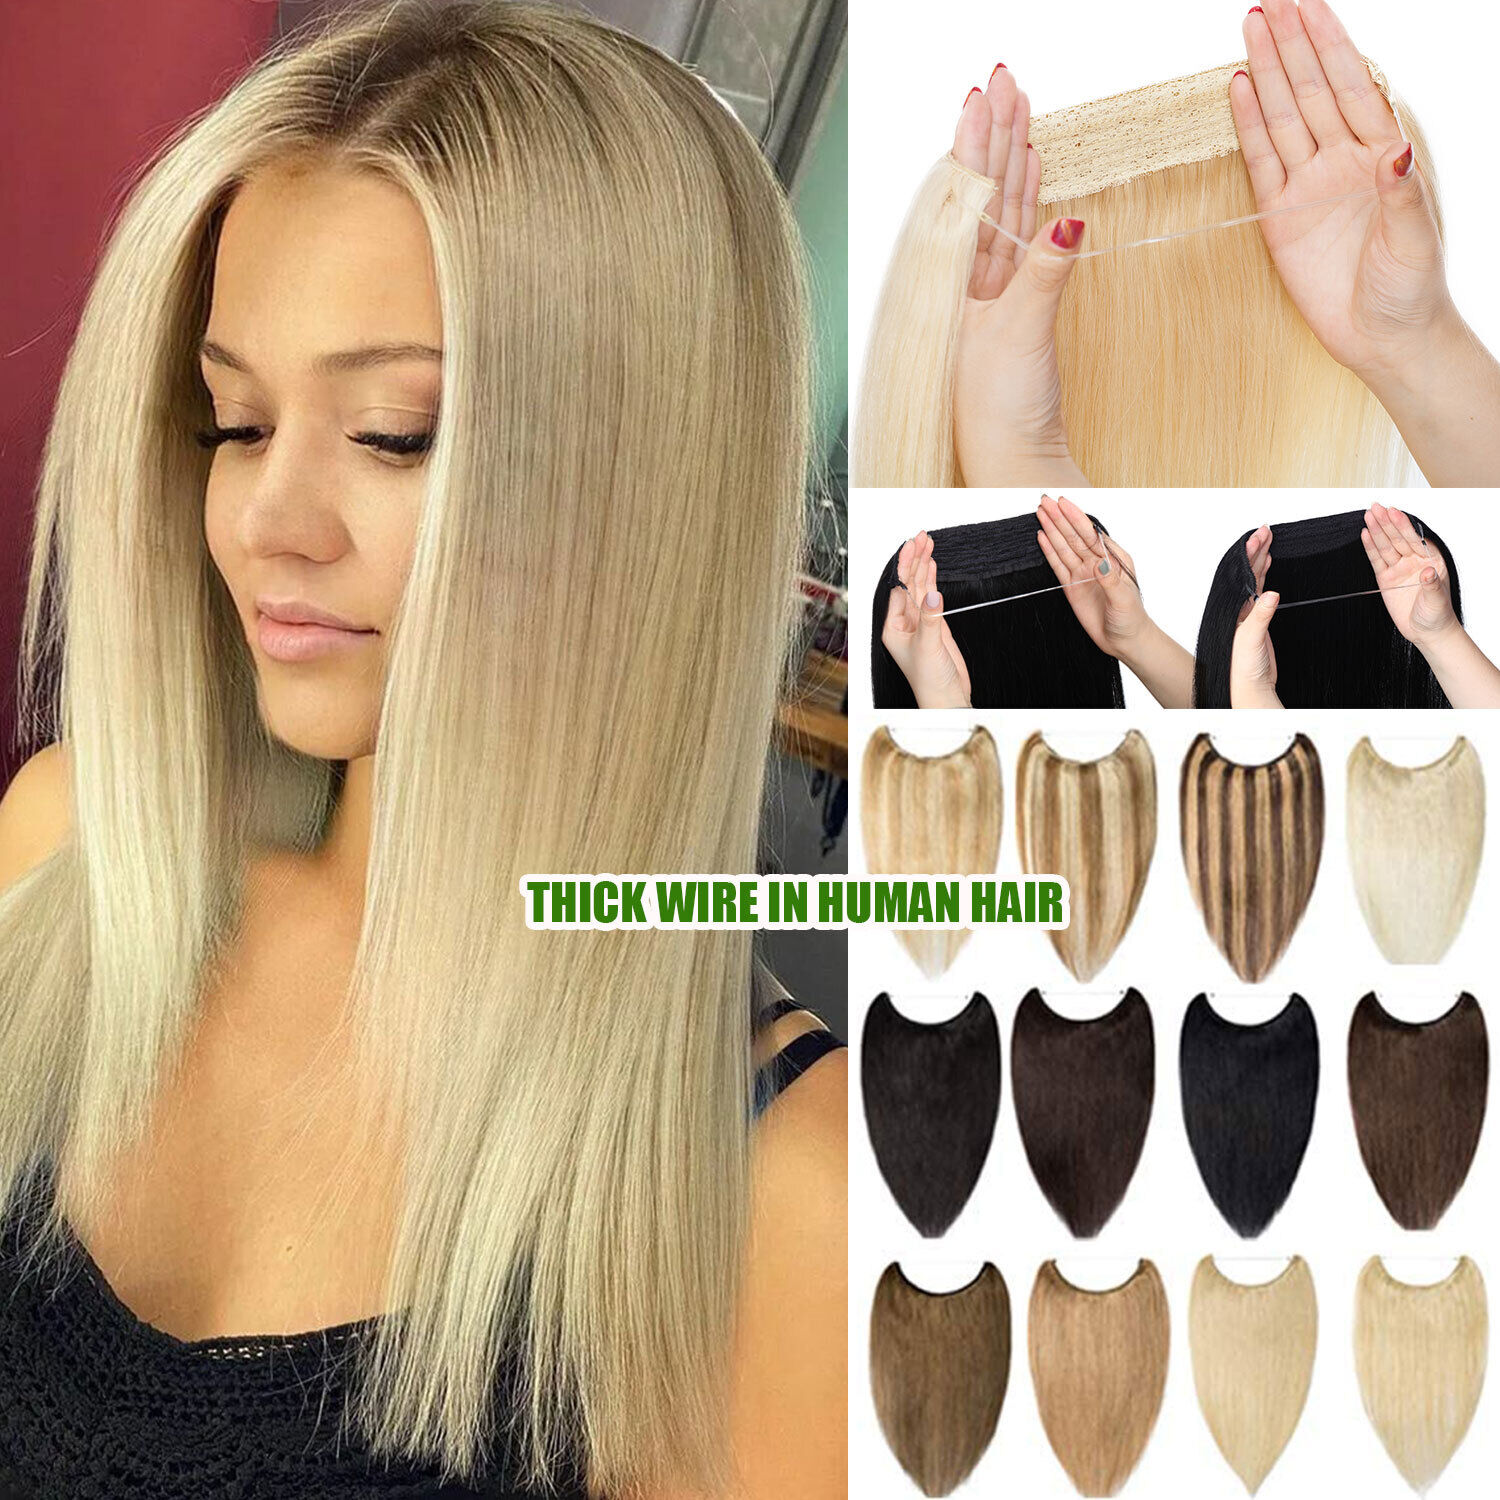 100% Remy Indian Human Hair Extensions Secret Wire In Headband One Piece # Blonde | eBay